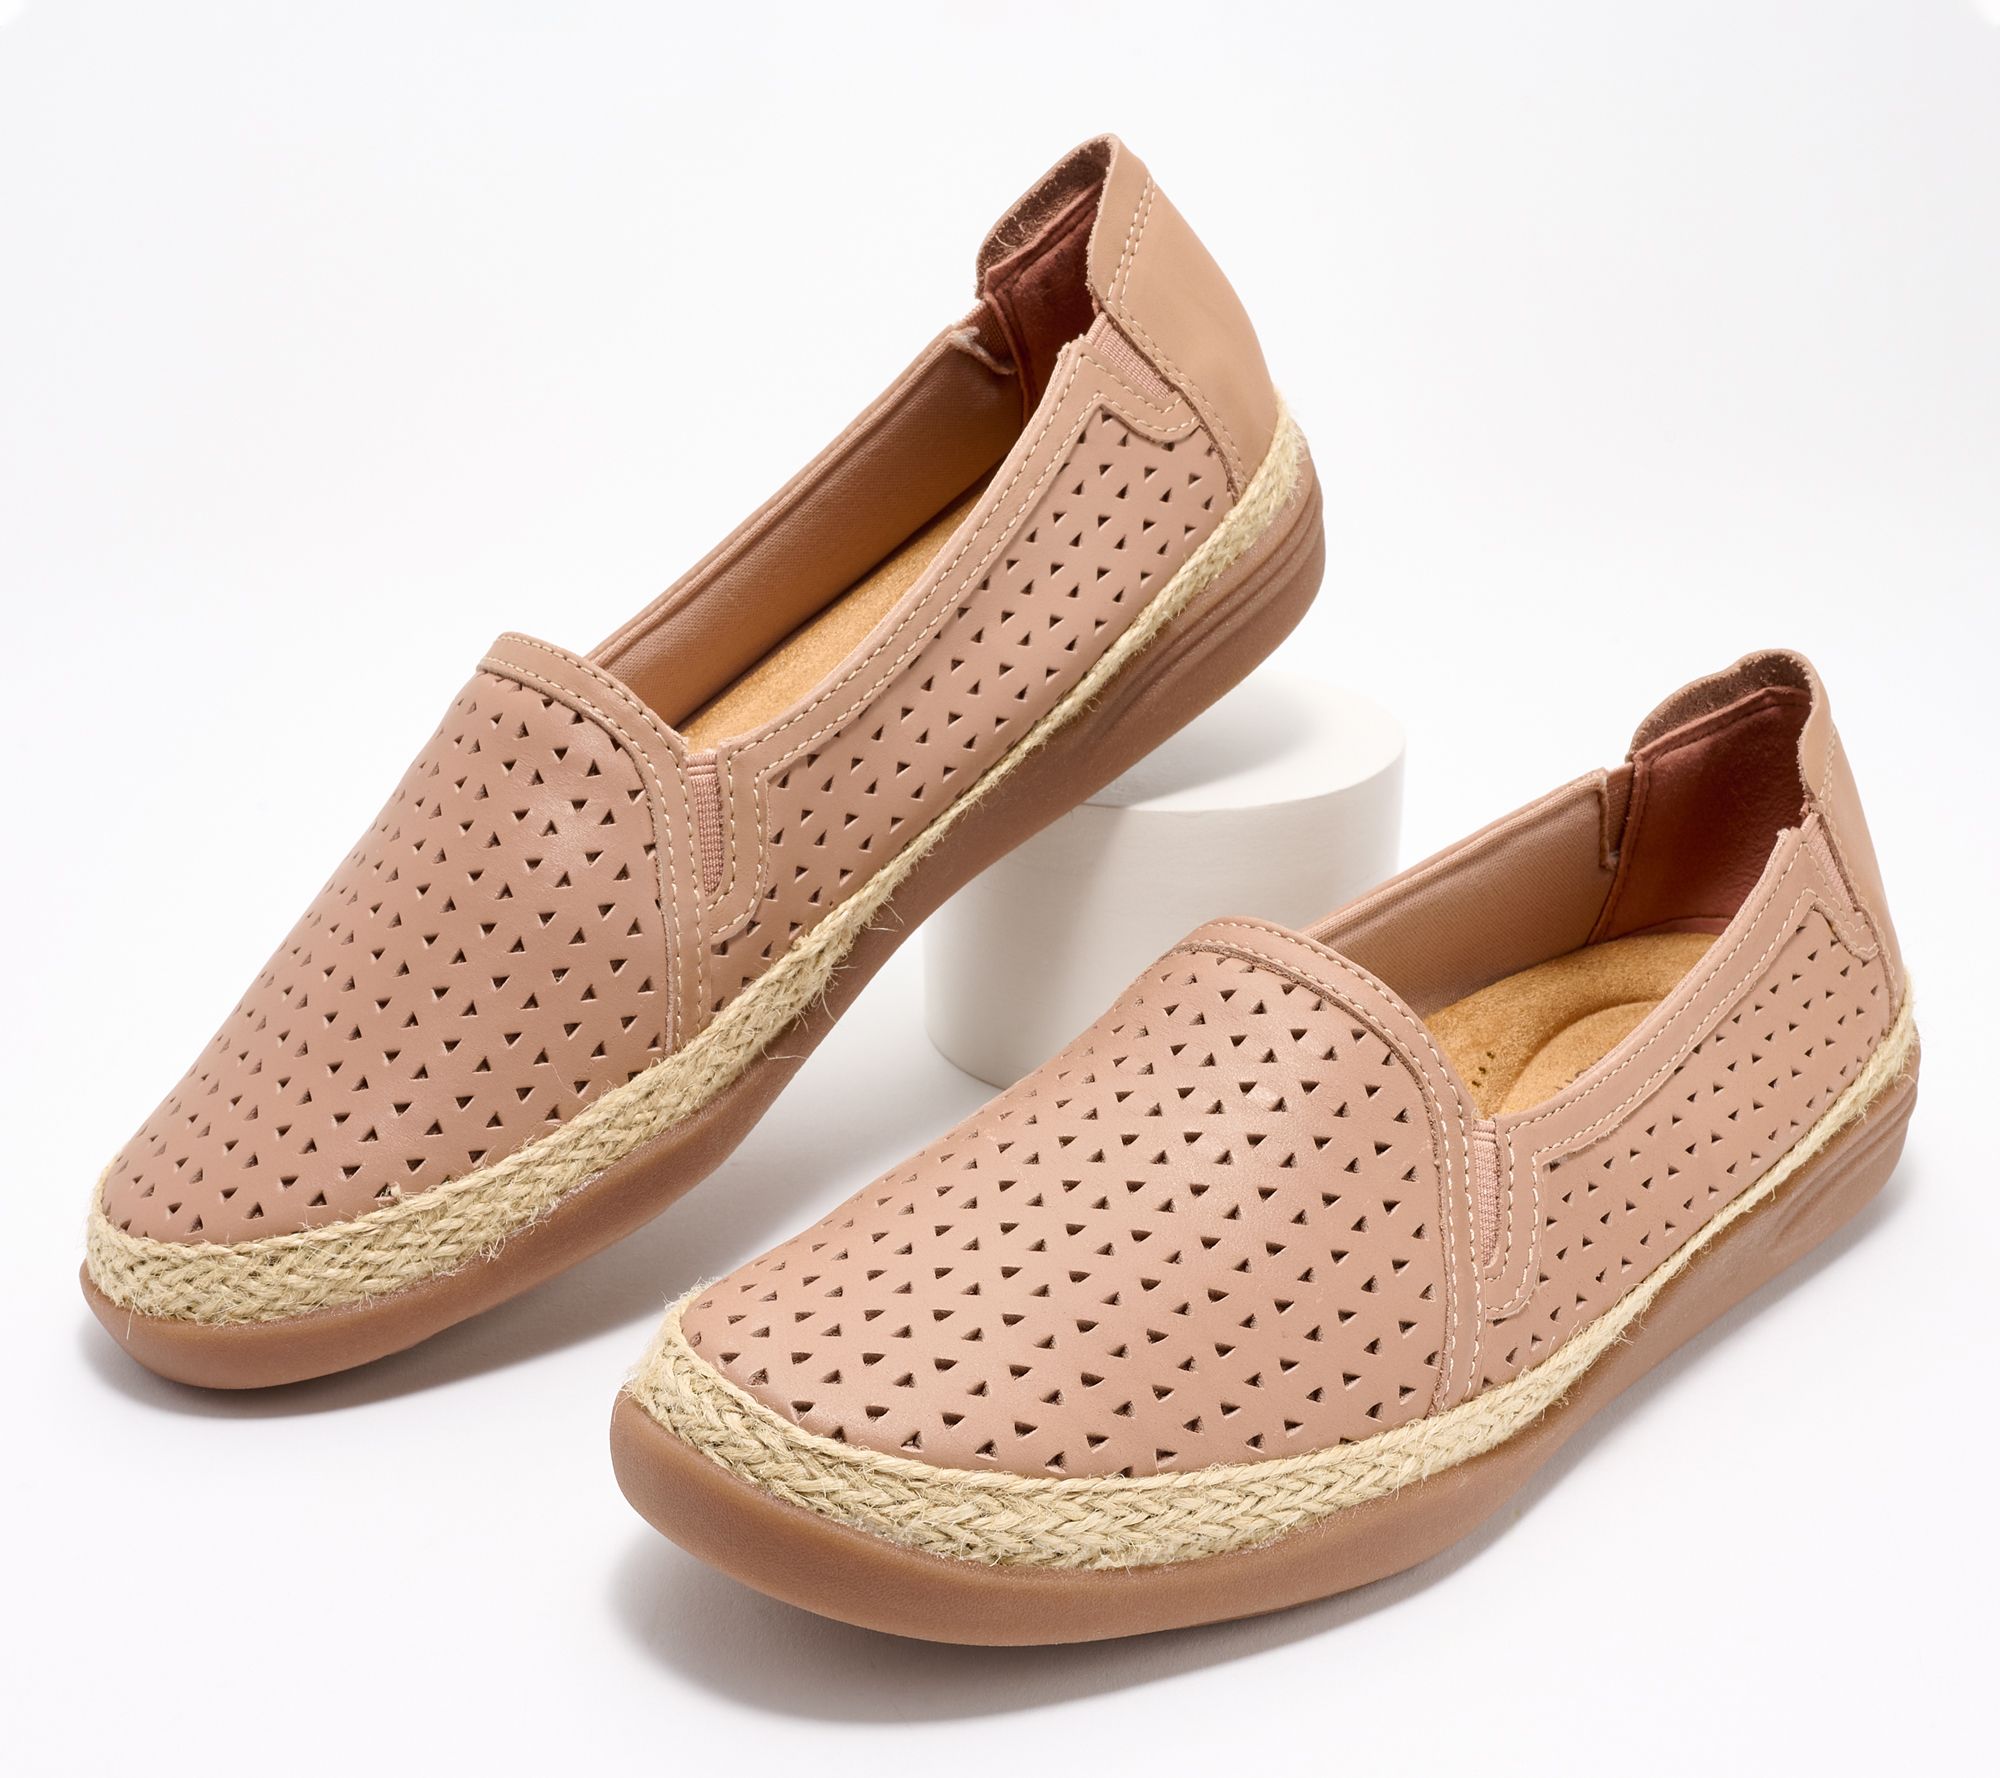 Clarks Collection Espadrille Slip-Ons - Elaina Ruby